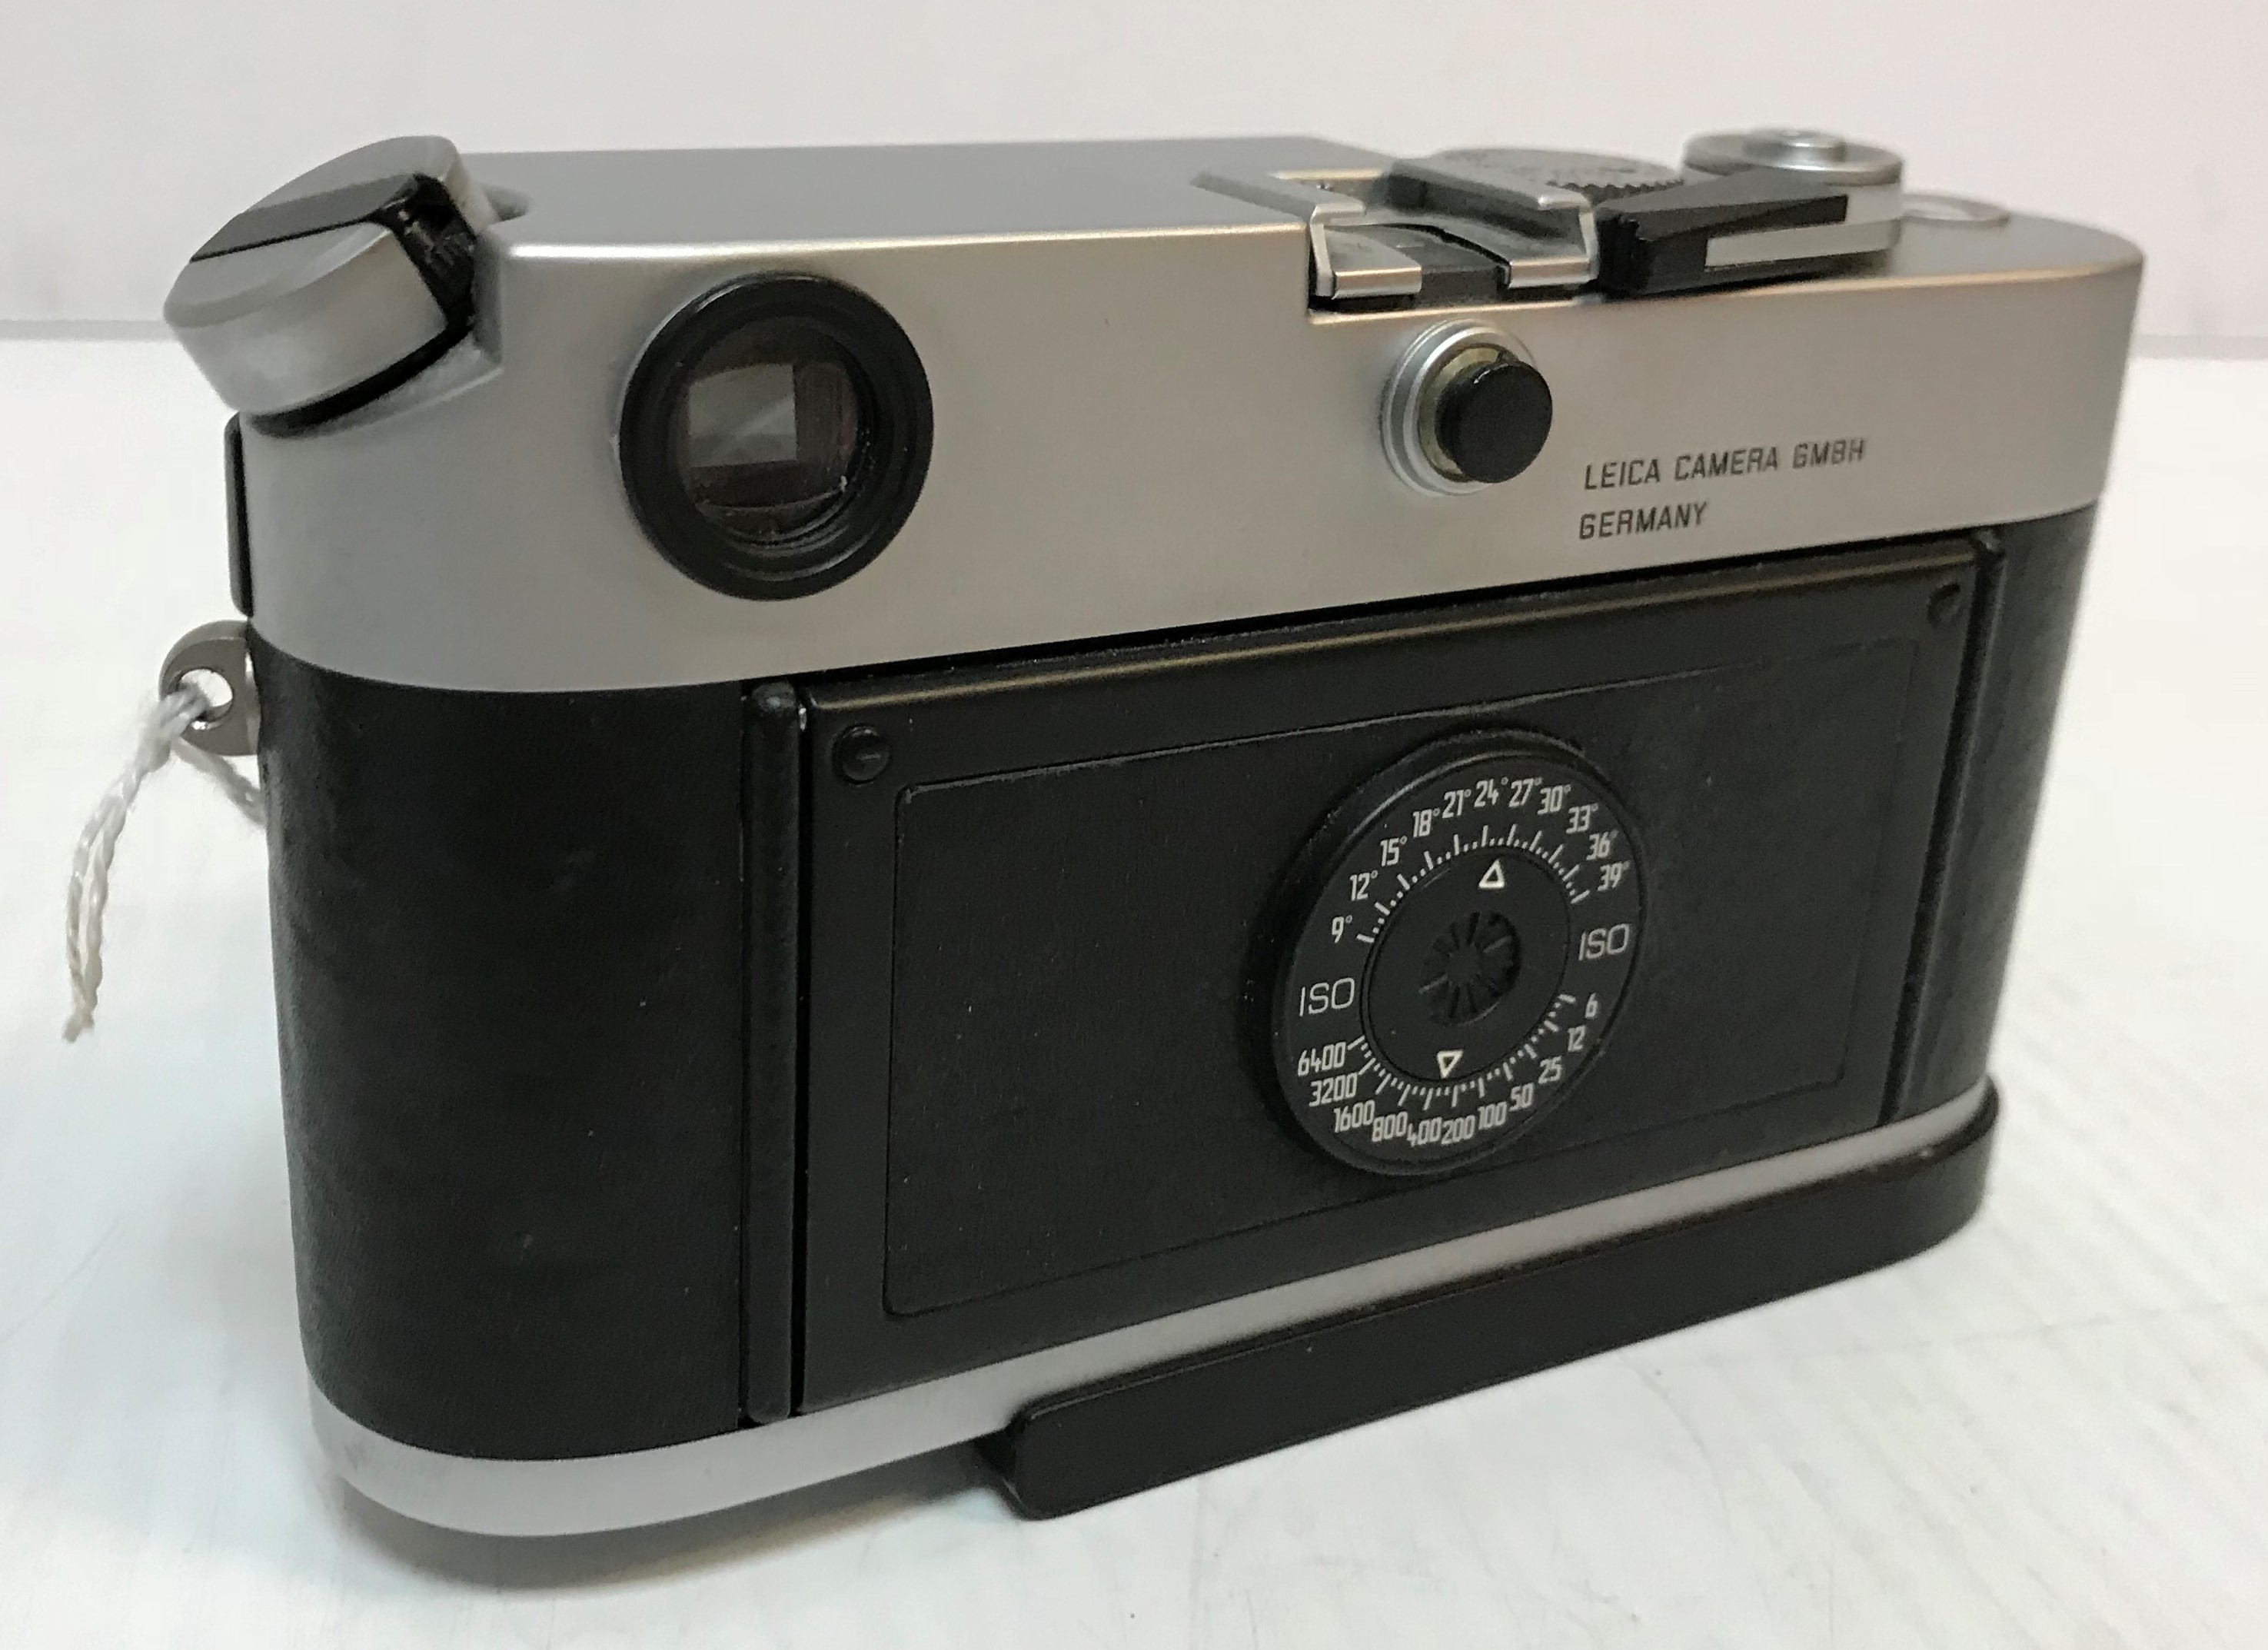 A Leica M6TTL camera by Leica Camera GmbH Germany with Summicron 1:2/50 lens (No. - Image 3 of 3